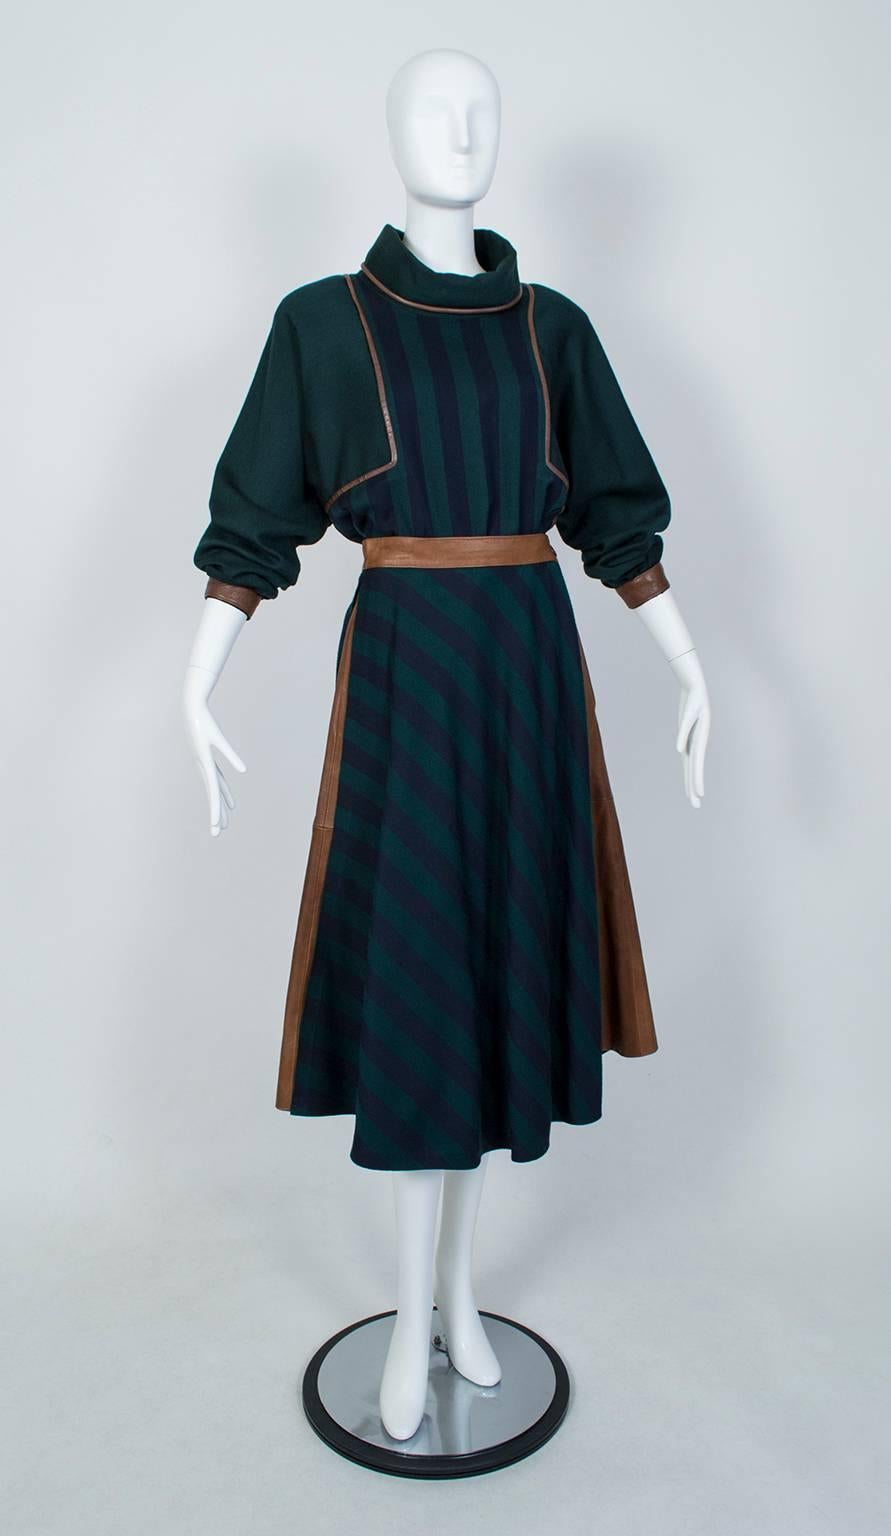 One part Molly Ringwald and one part Hermès equestrienne, this pullover and midi skirt ensemble is unlike anything we've seen. 